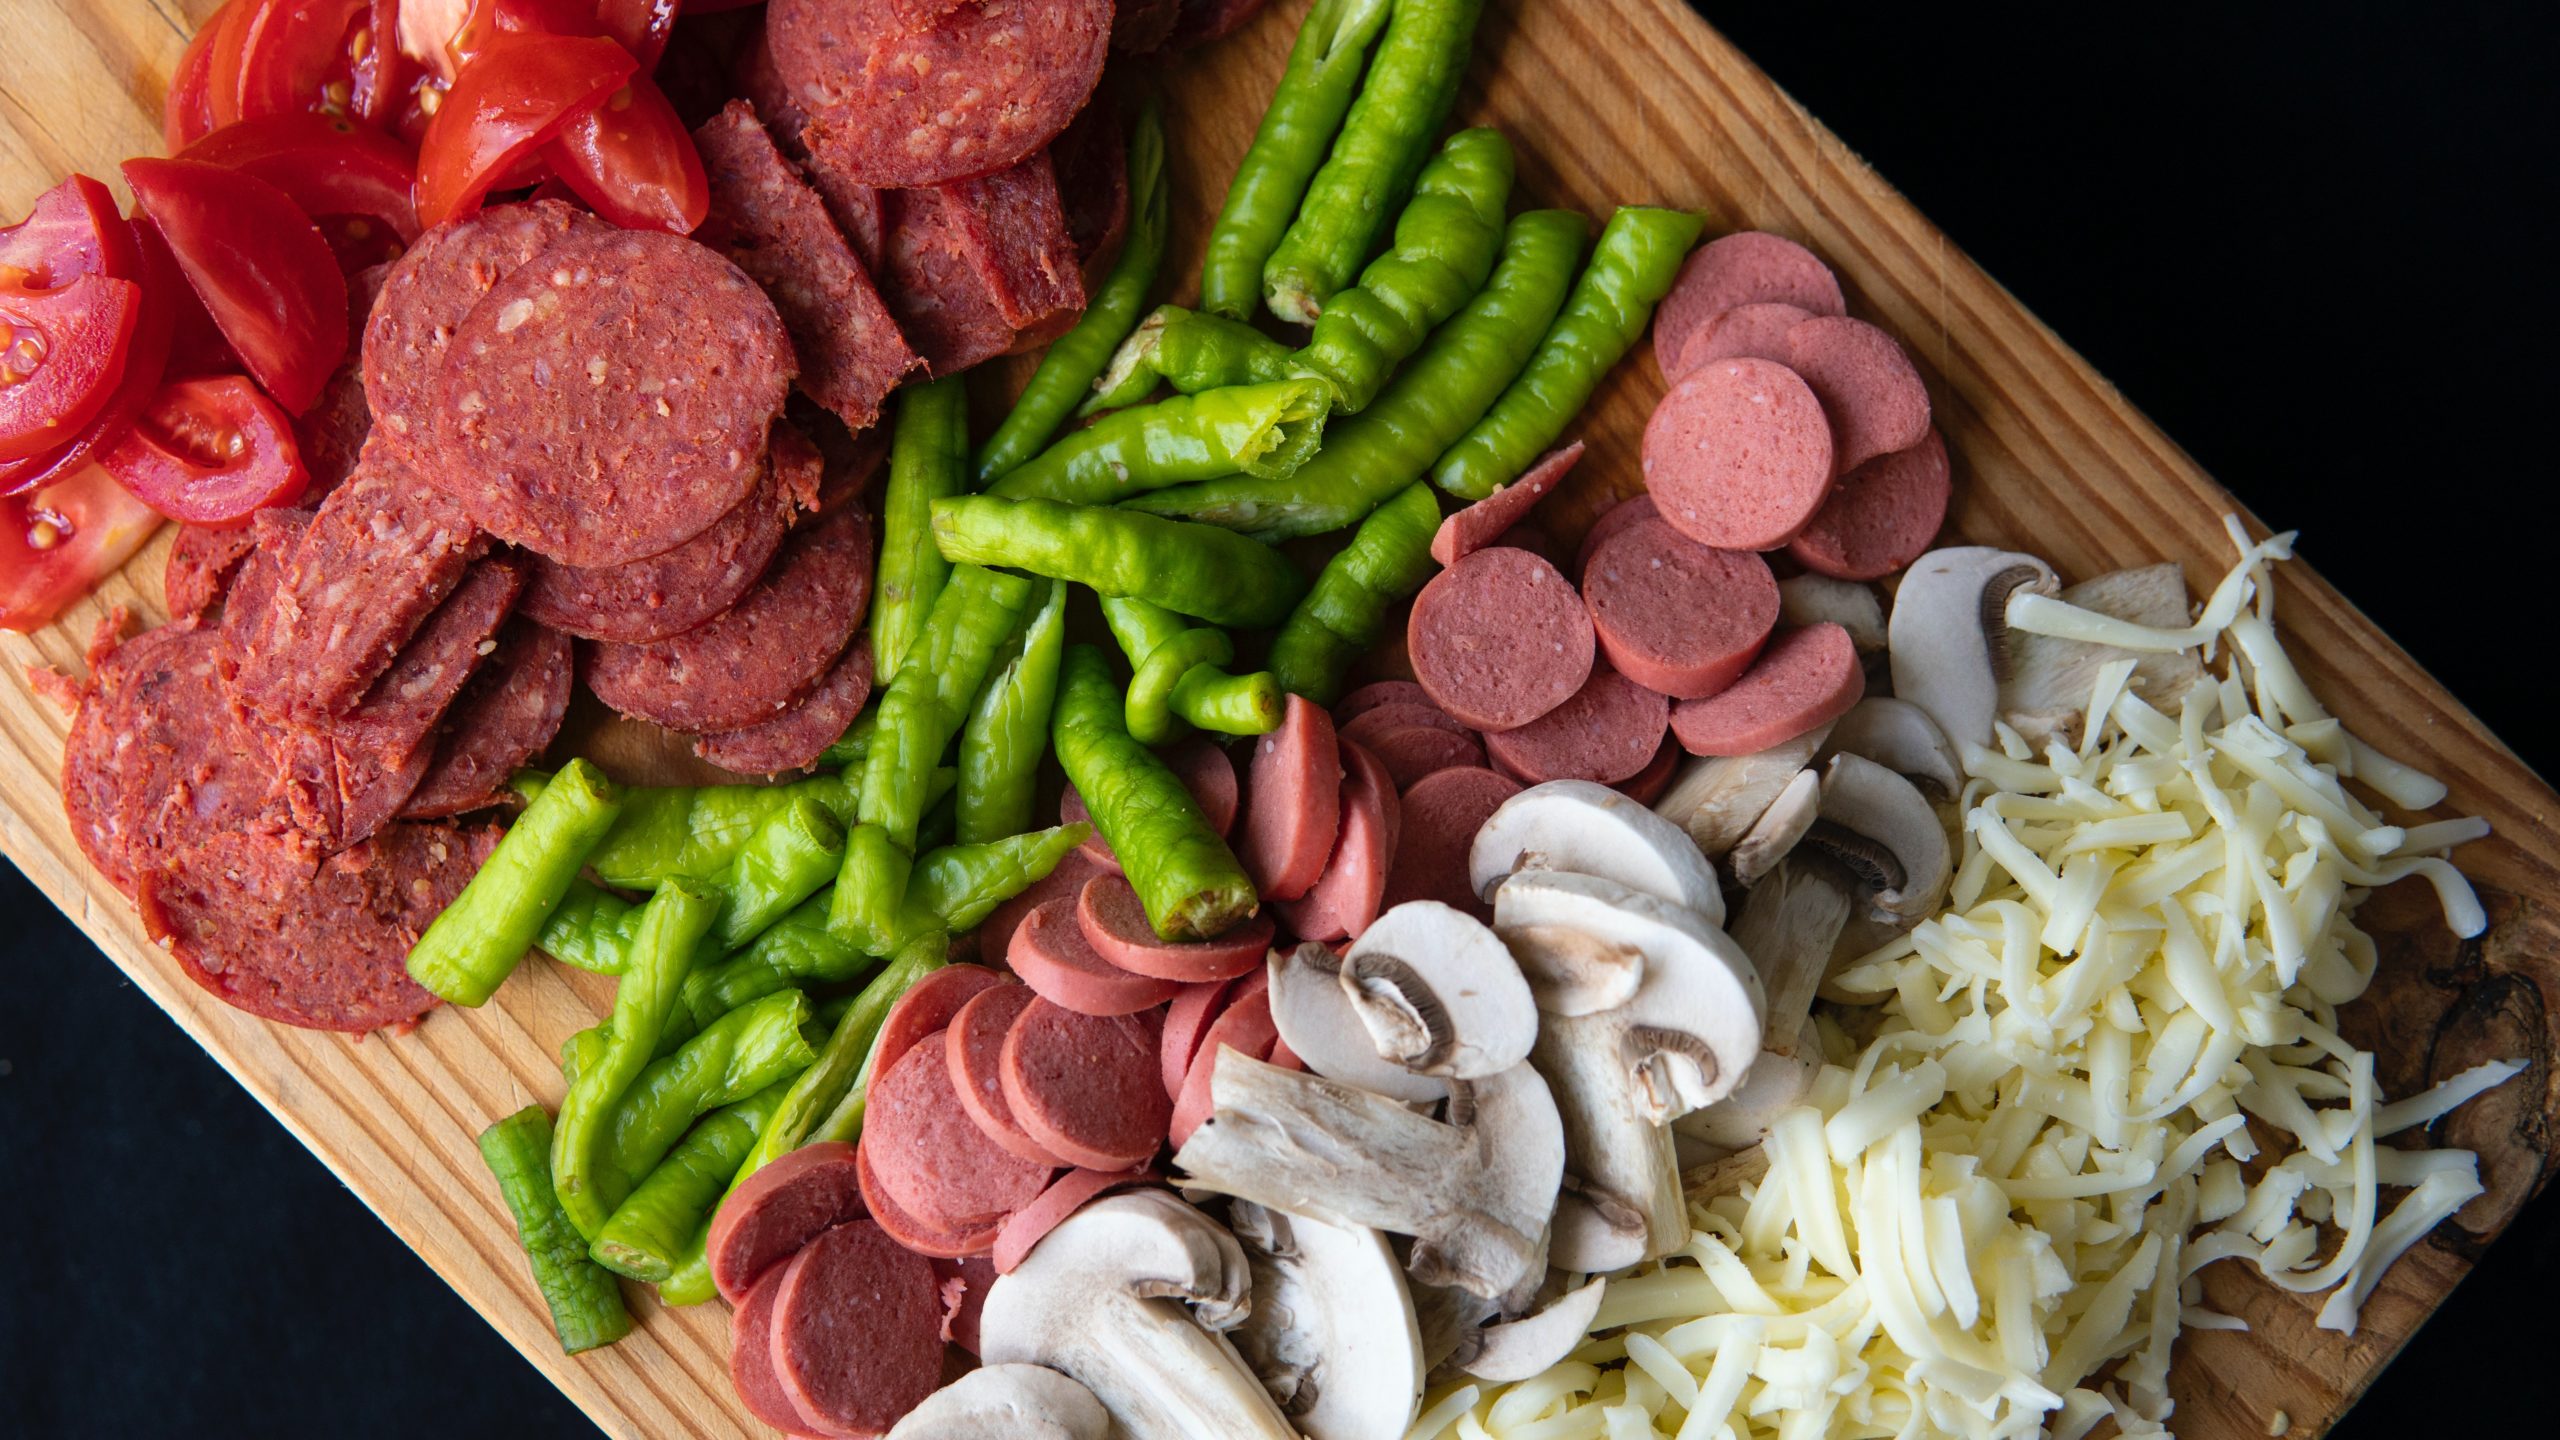  tomatoes, peppers, Italian sausages, mushrooms and grated cheese on a wooden board